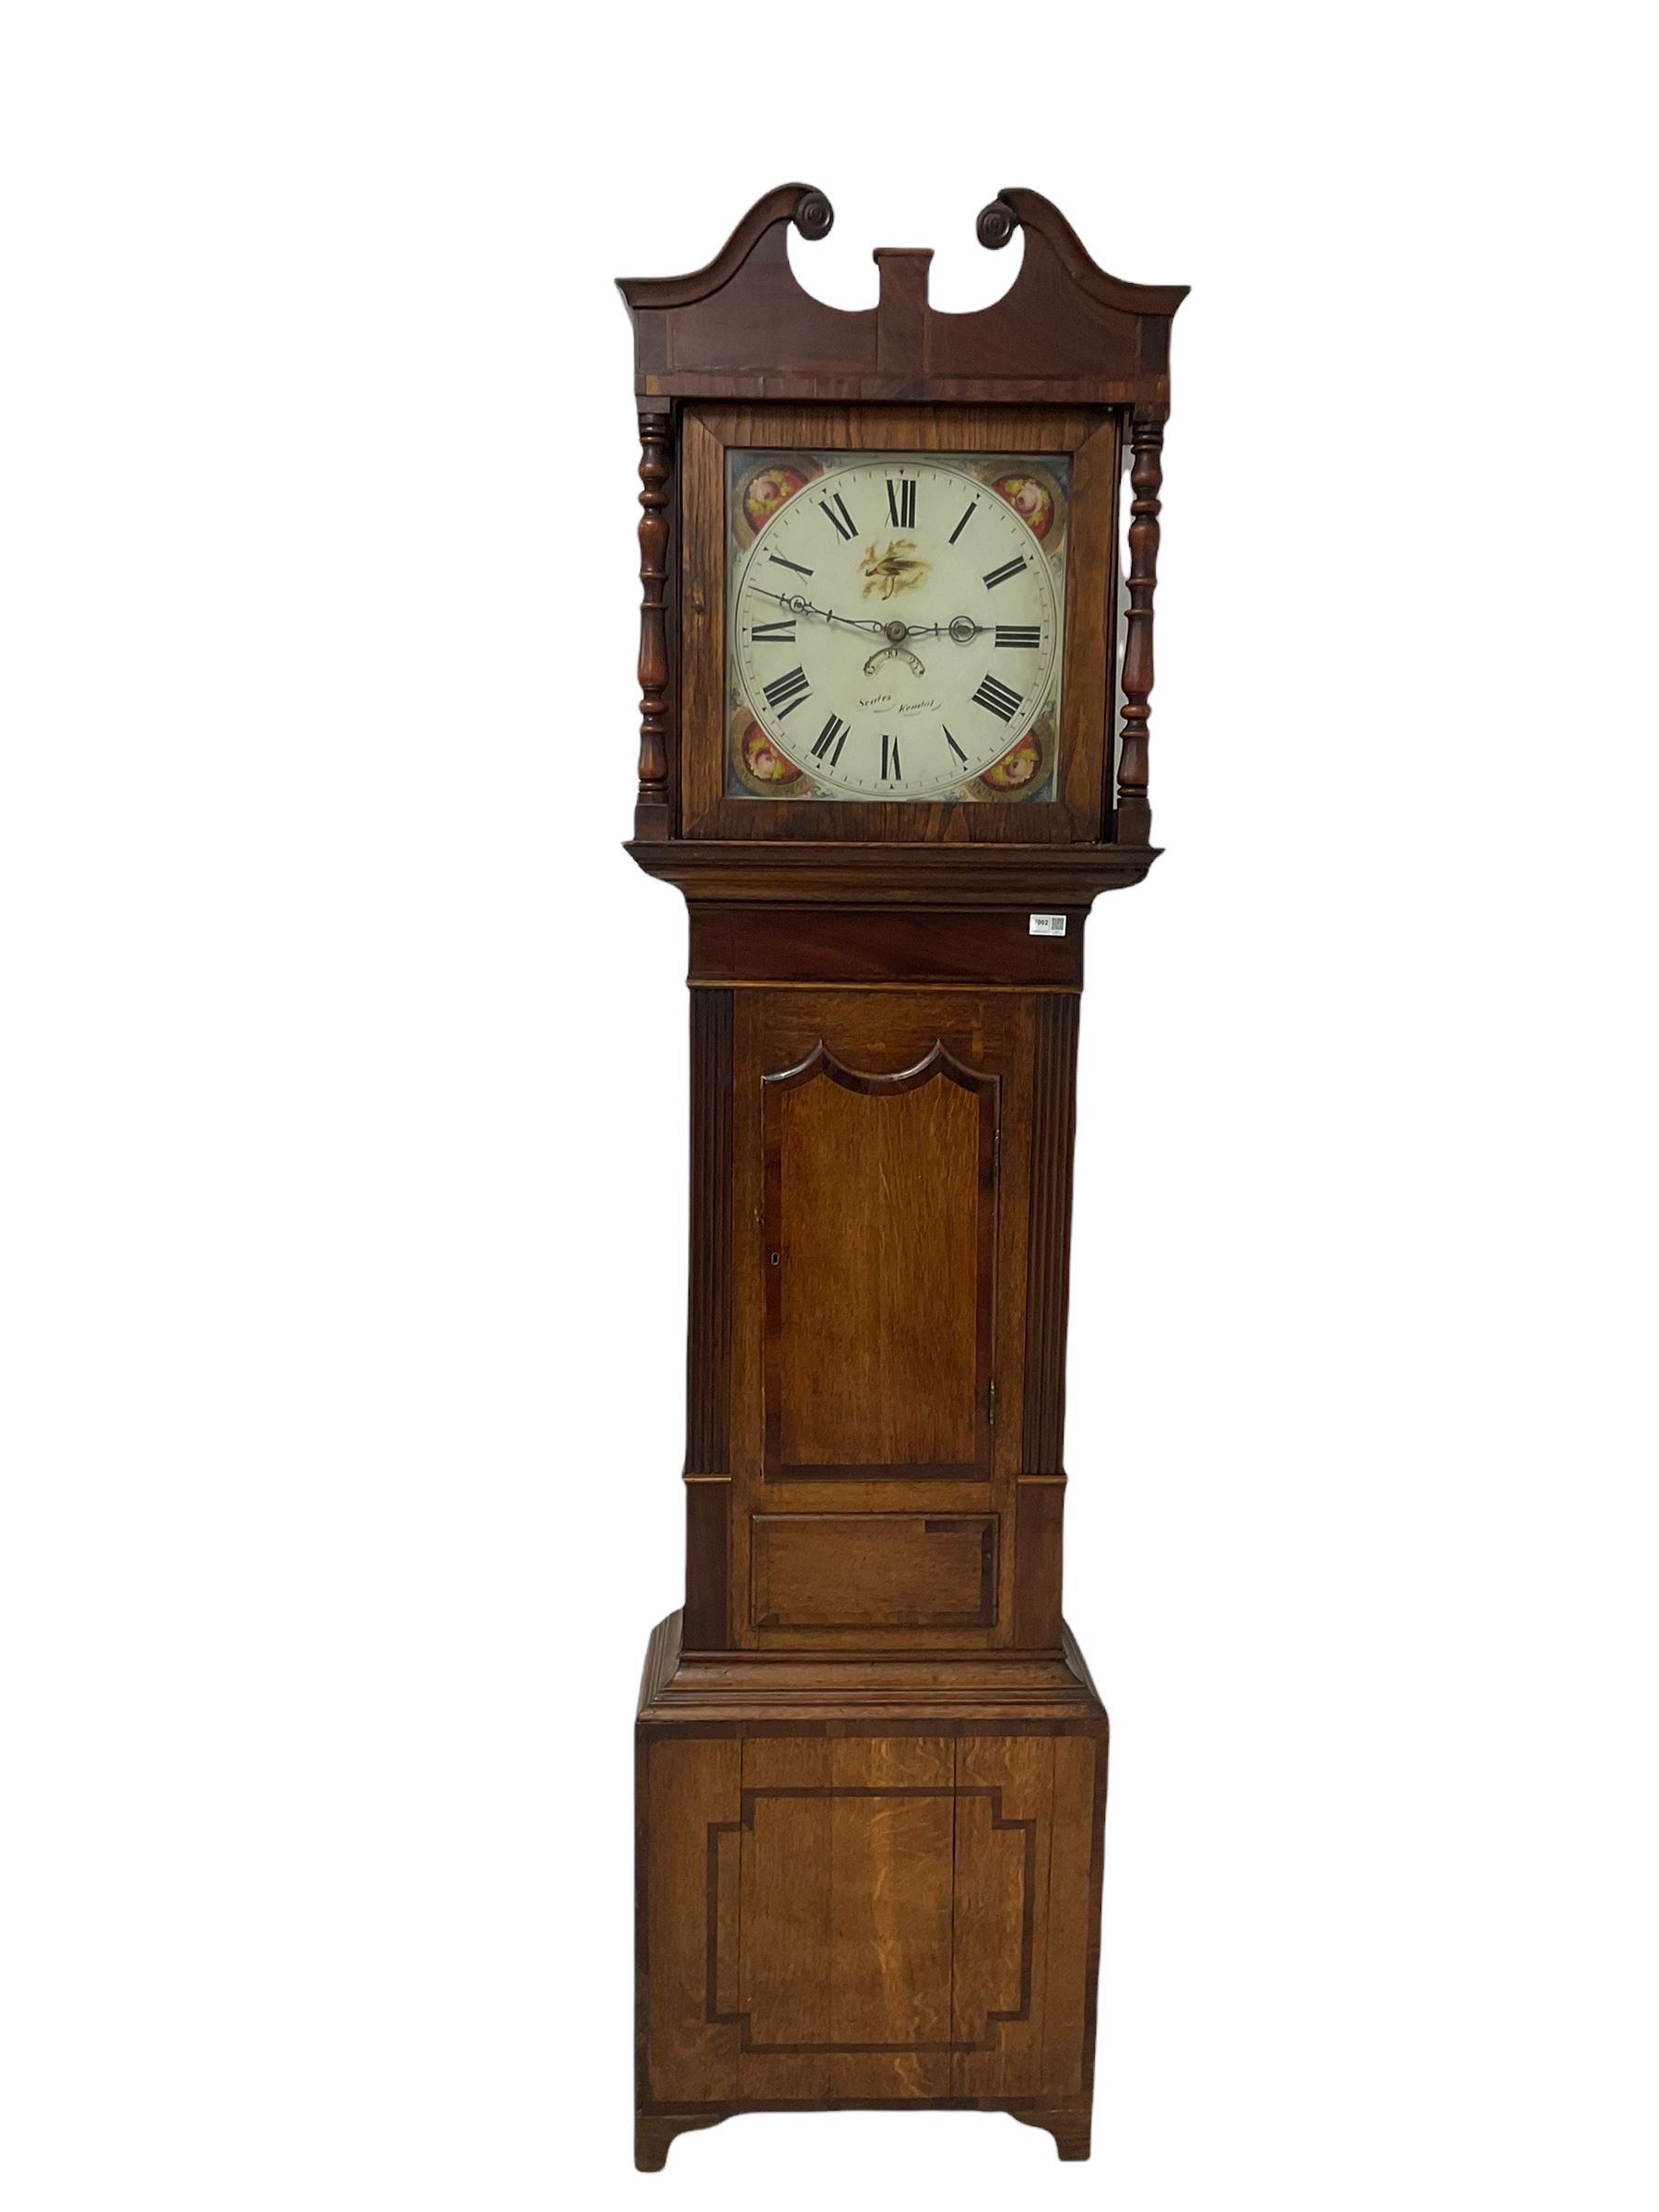 A mid-19th century oak cased longcase clock with a swan's neck pediment and wooden paterae